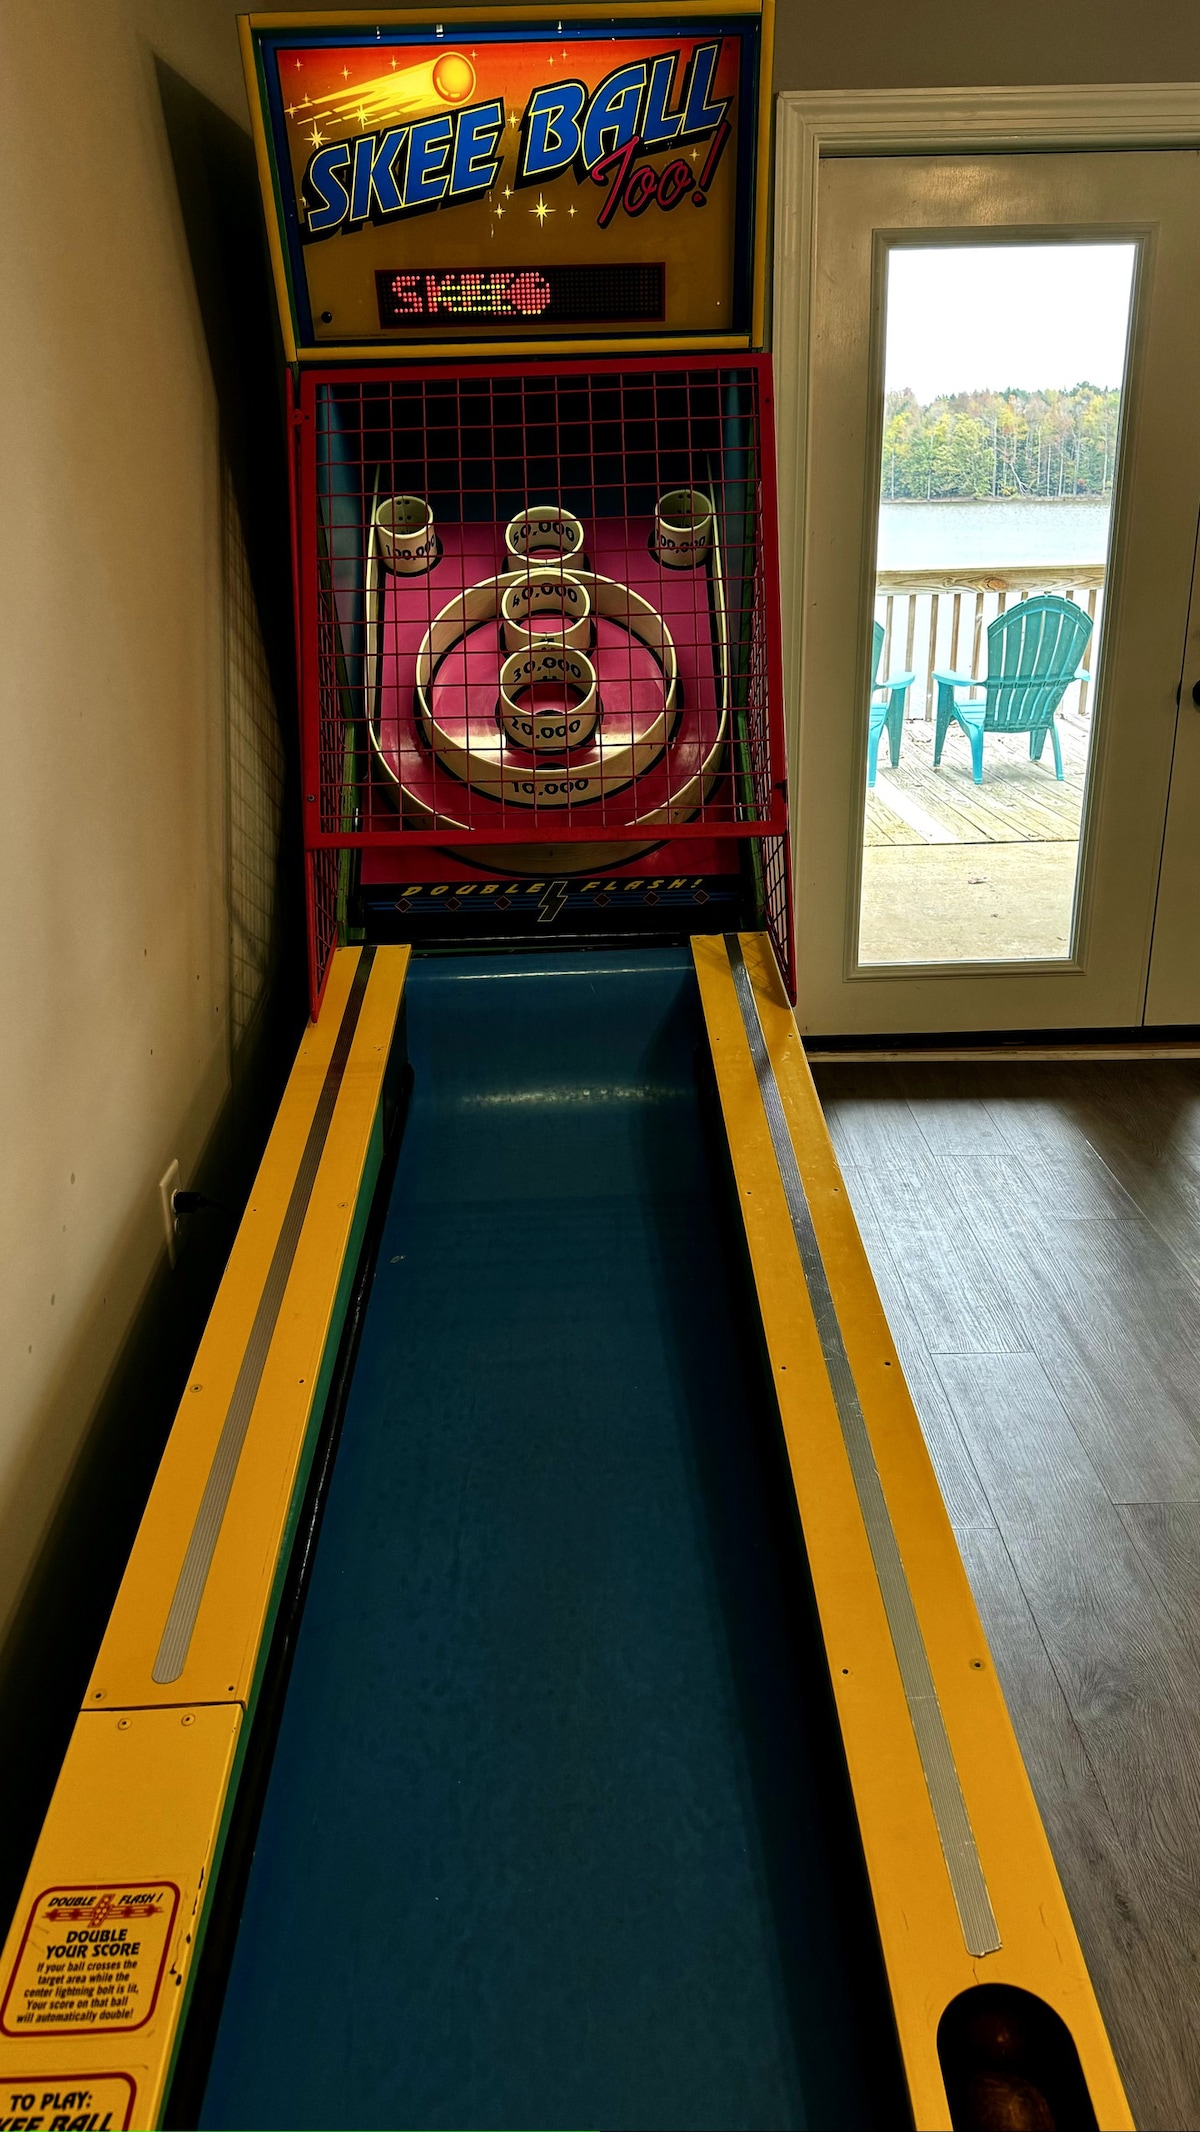 The Playground! 4br/3ba Views! Skee-ball®! More!